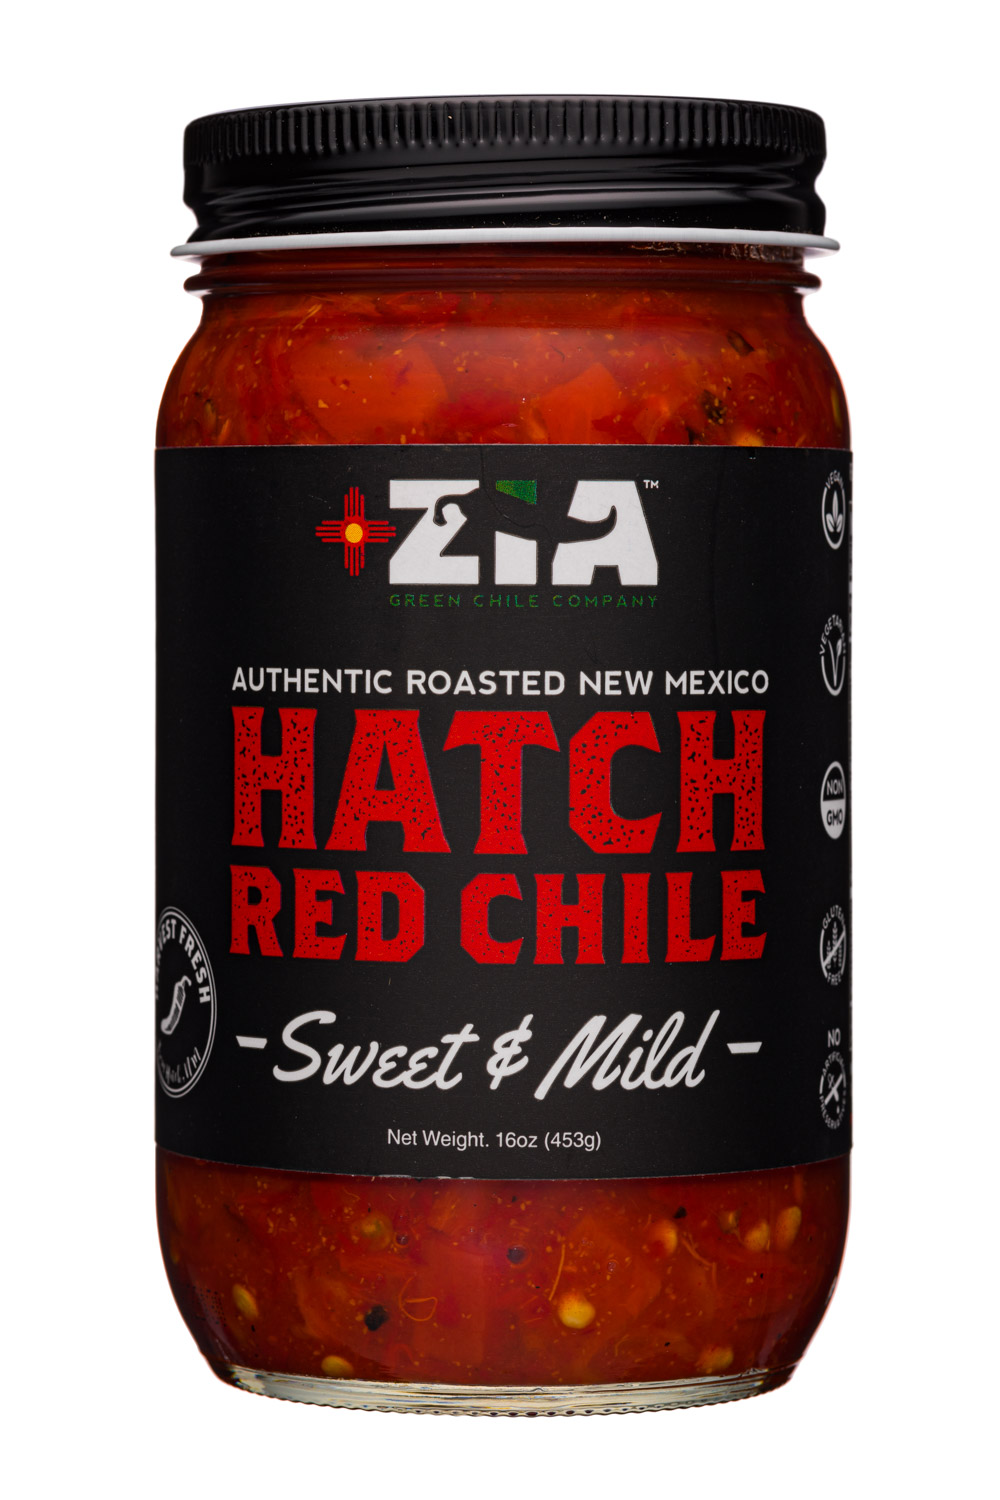 Hatch Red Chil;e - Sweet & Mild